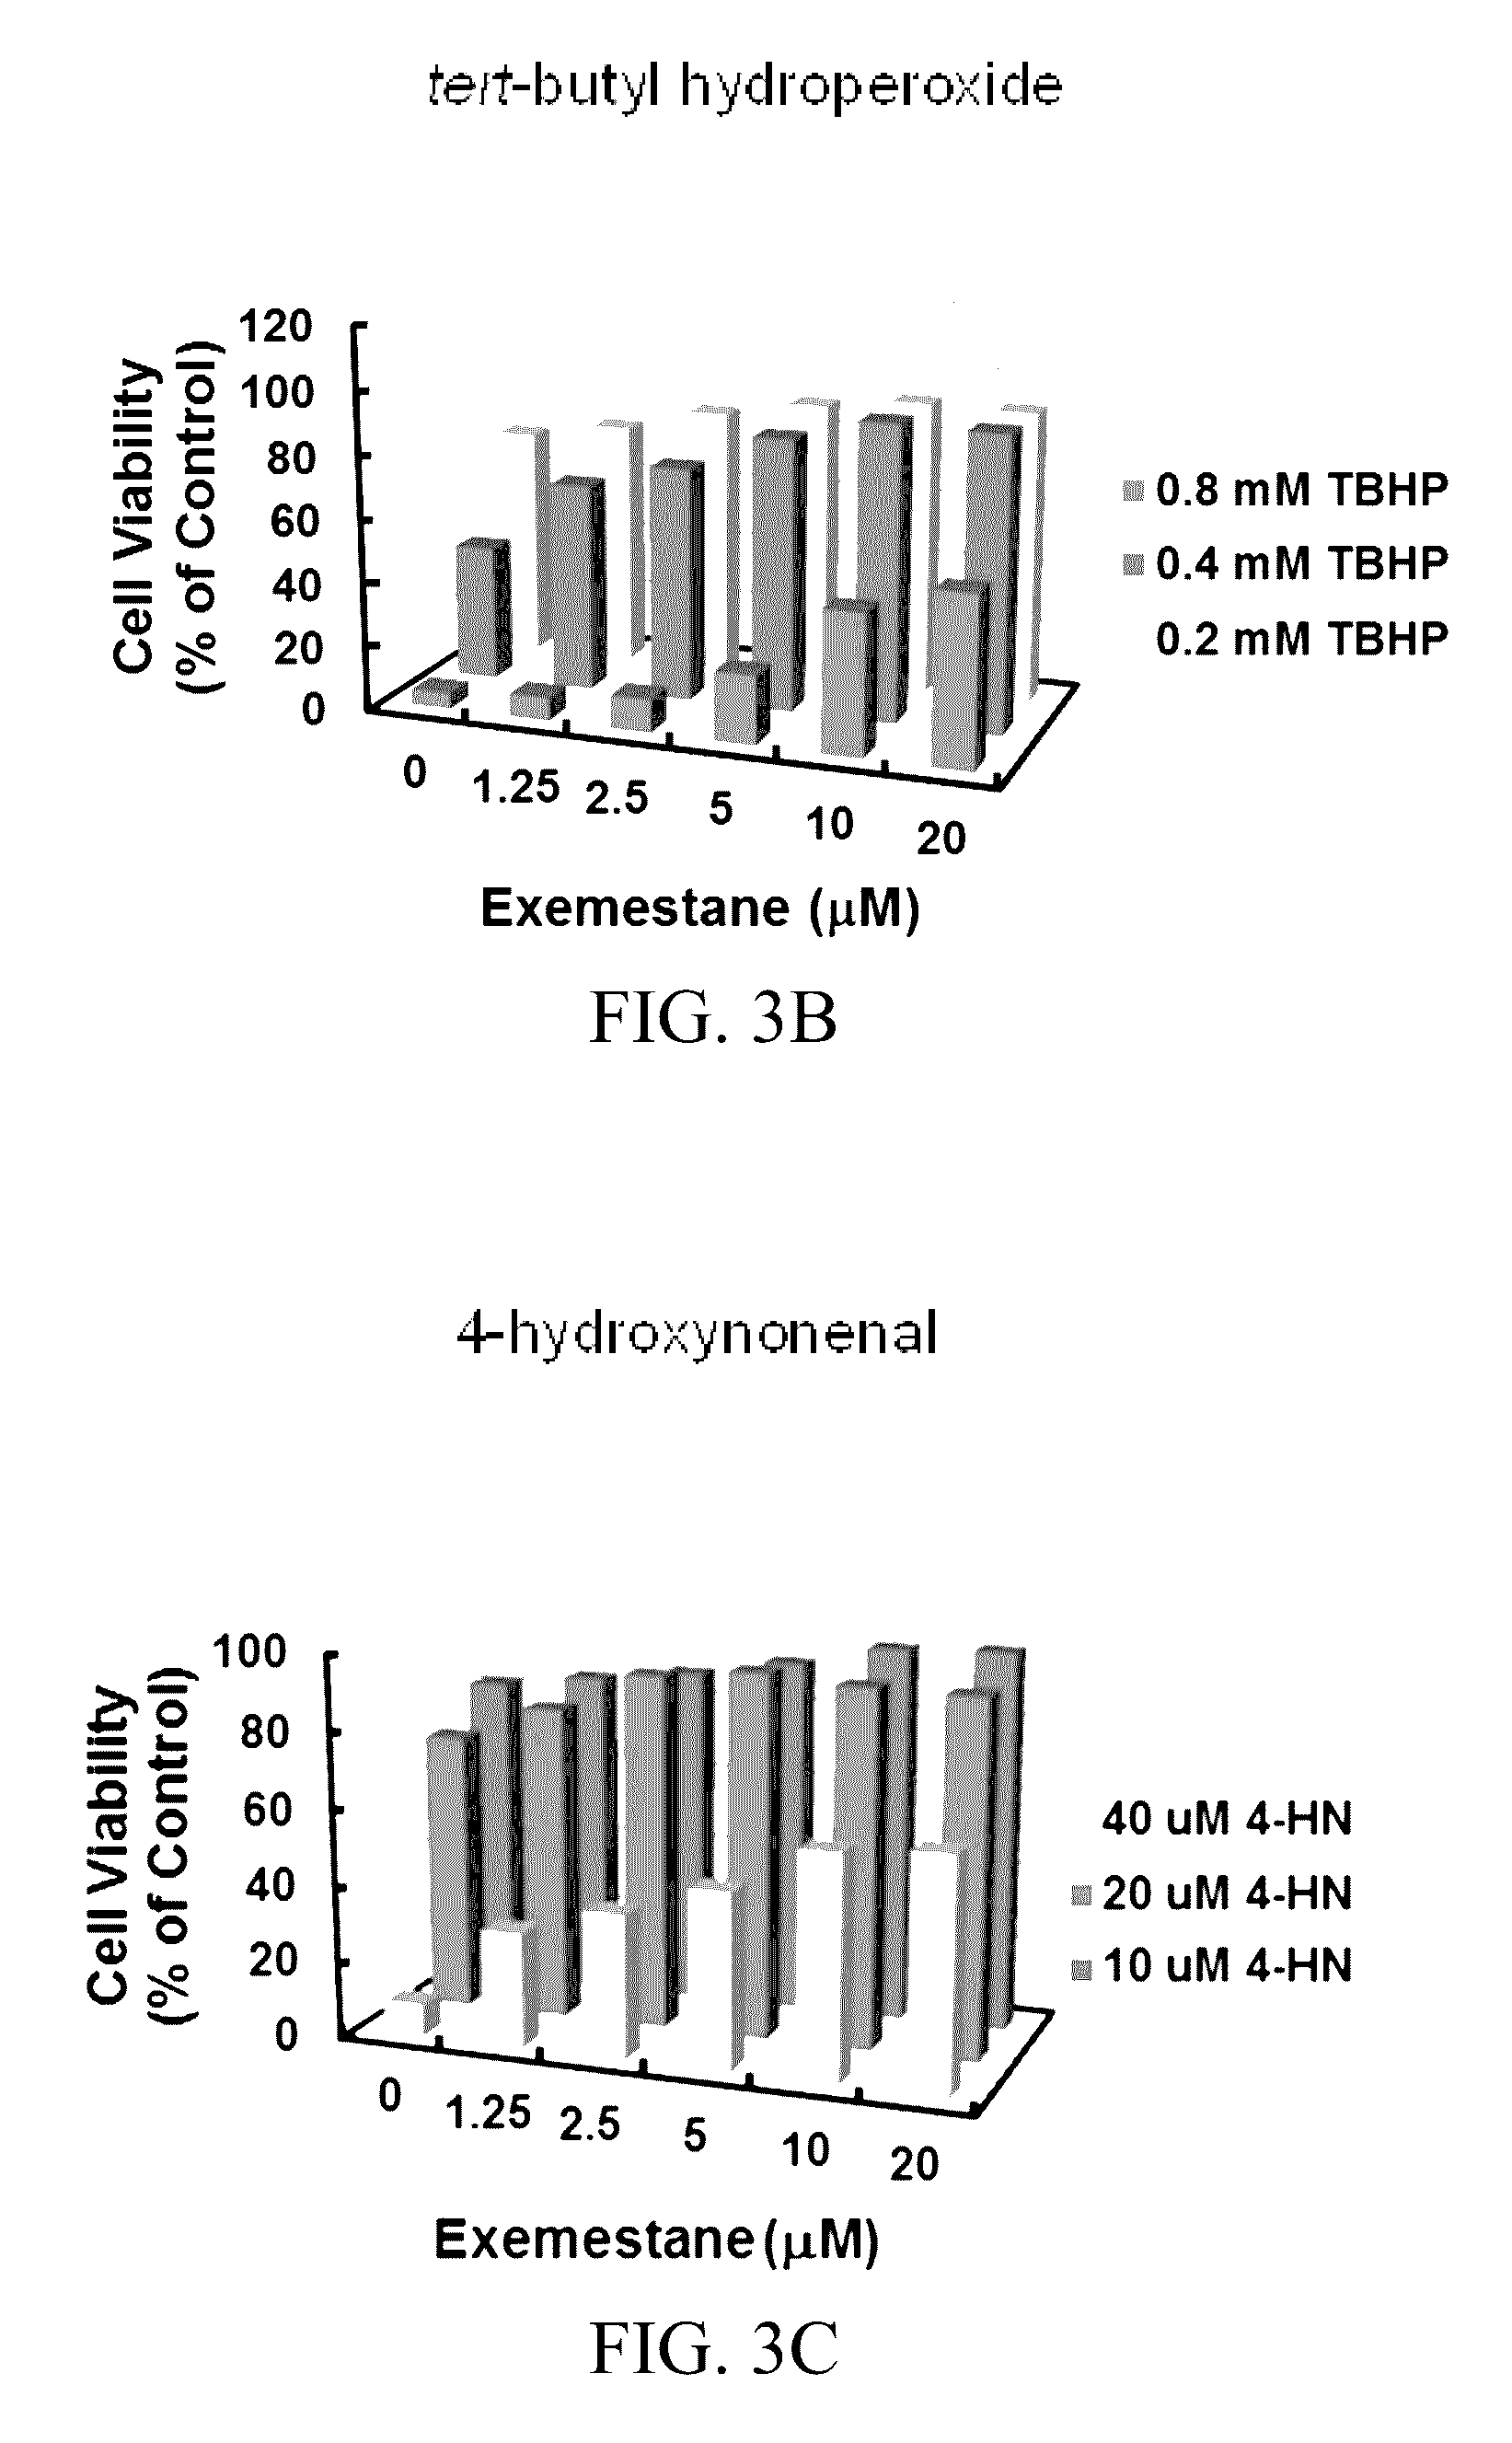 Compositions comprising exemestane and novel methods of use